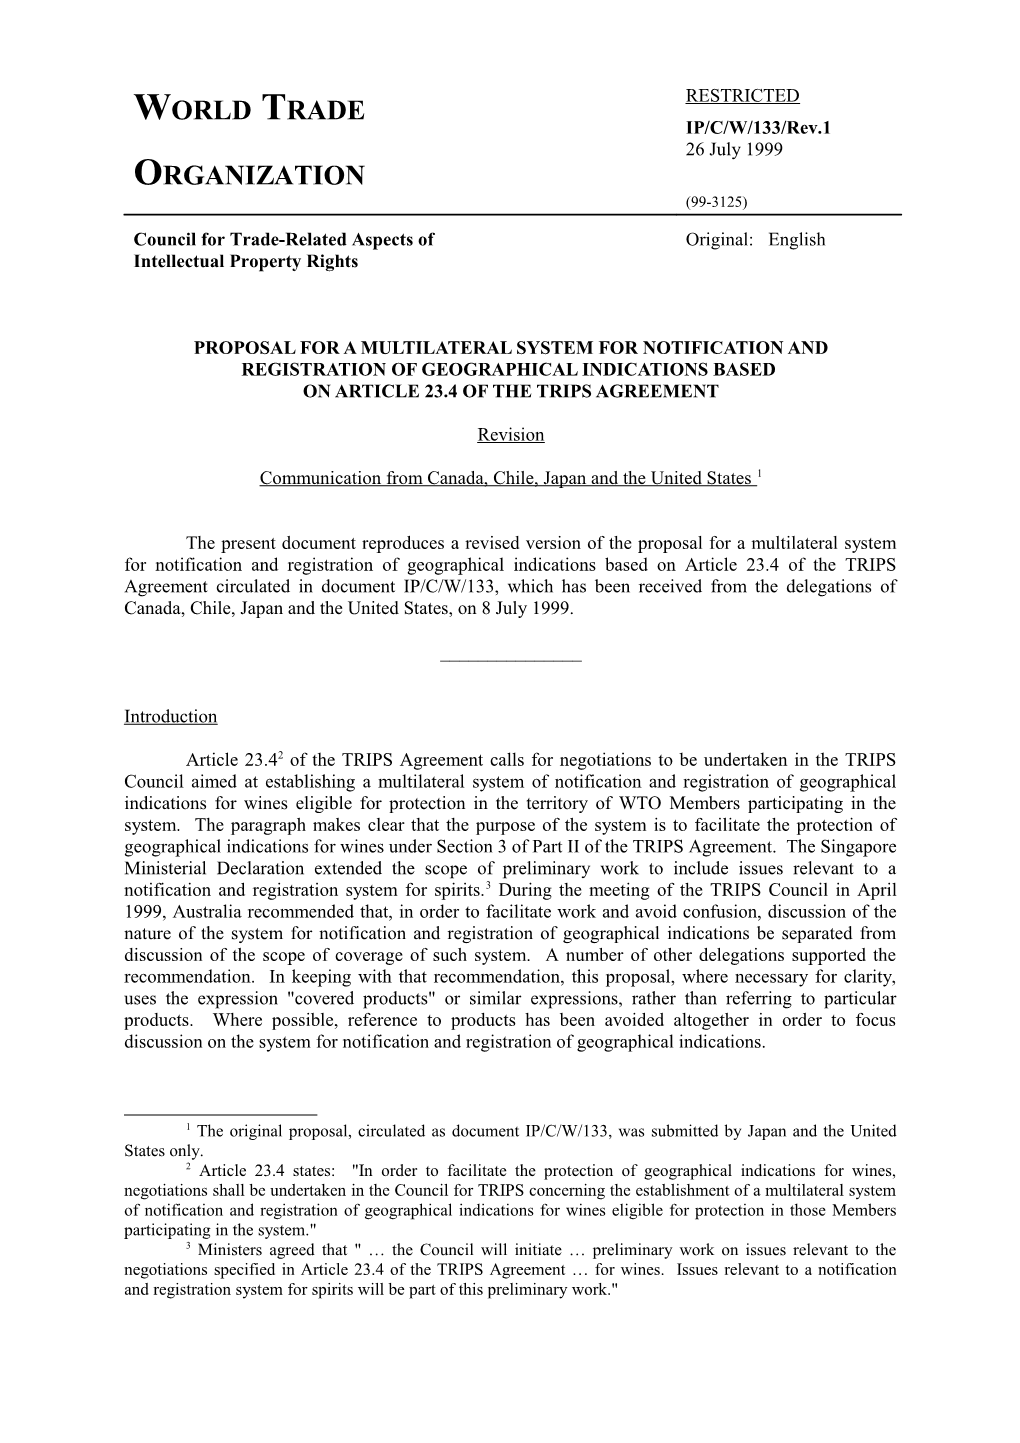 Proposal for a Multilateral System for Notification and Registration of Geographical